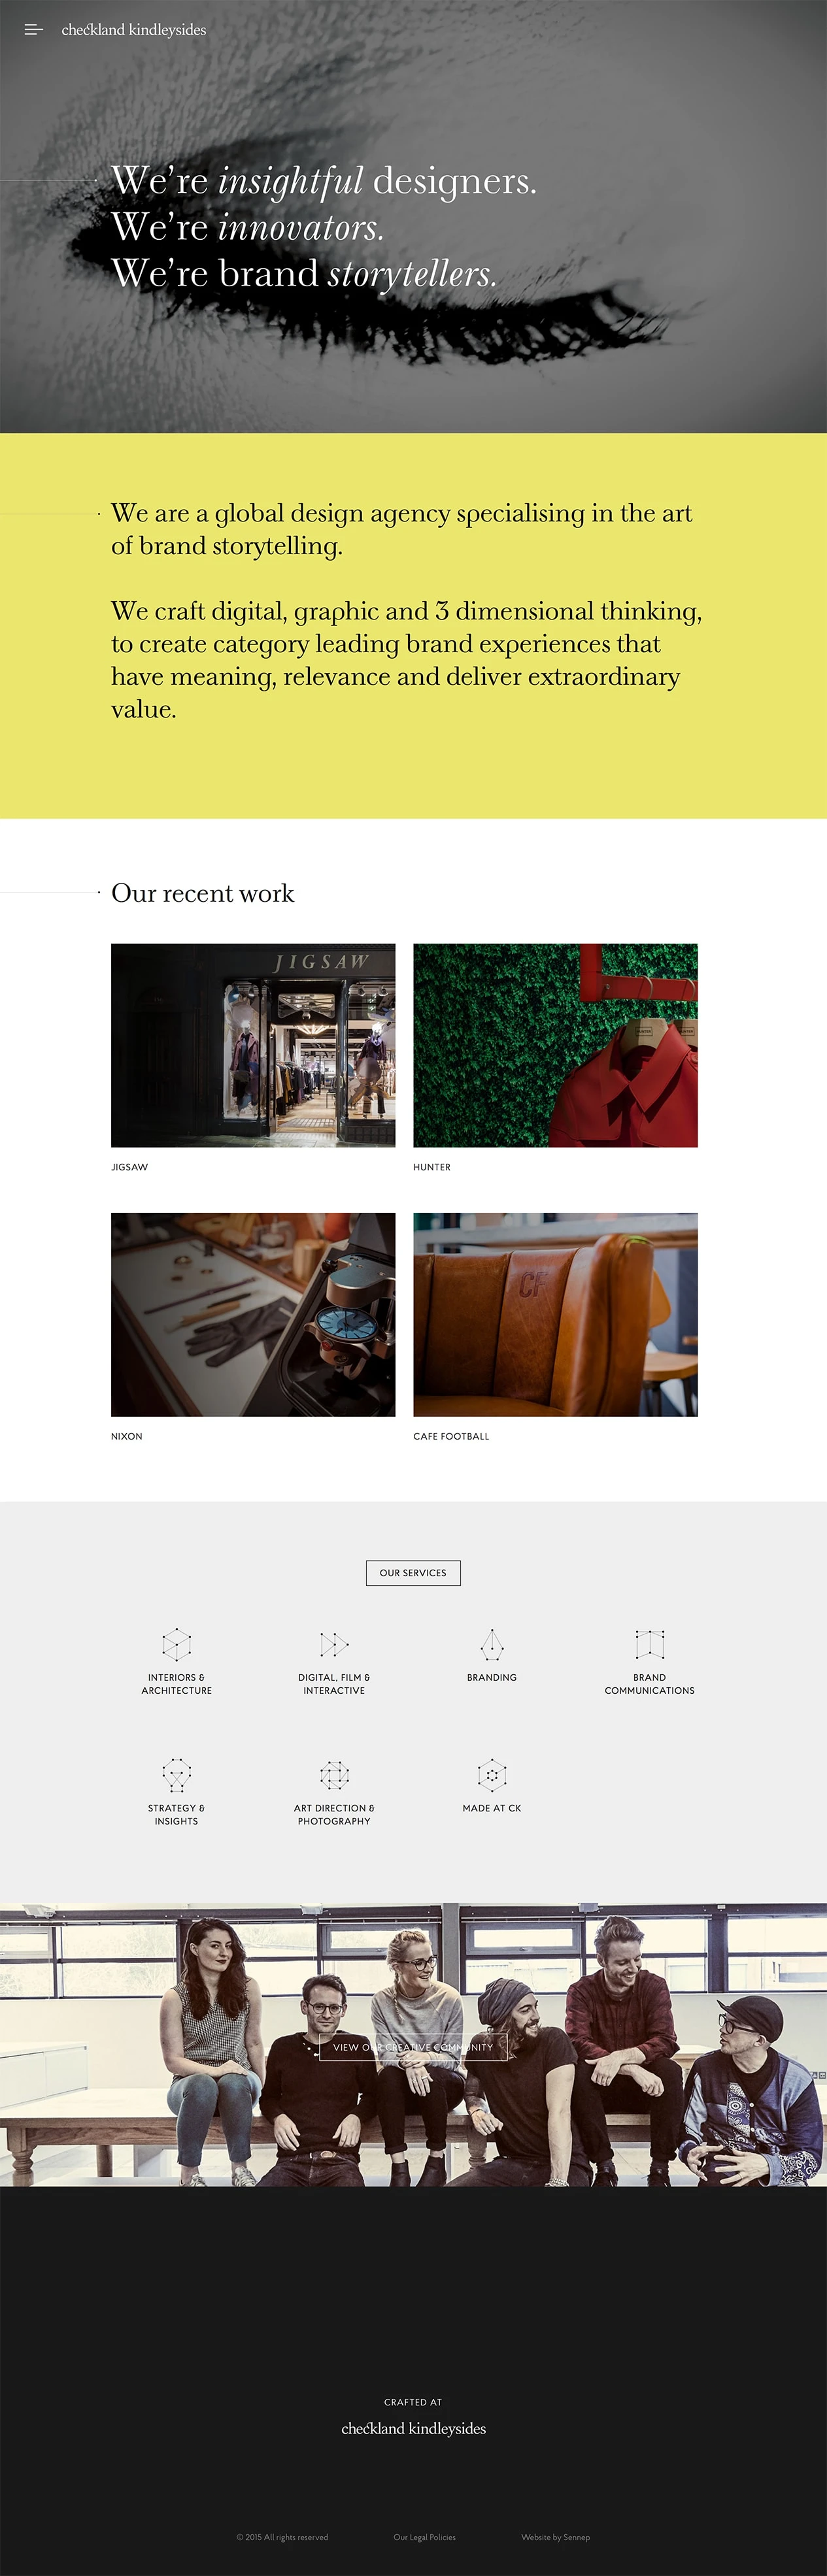 Checkland Kindleysides Landing Page Example: Checkland Kindleysides is a global design agency specialising in the art of brand storytelling. We craft digital, graphic and 3 dimensional thinking to create category leading brand experiences.